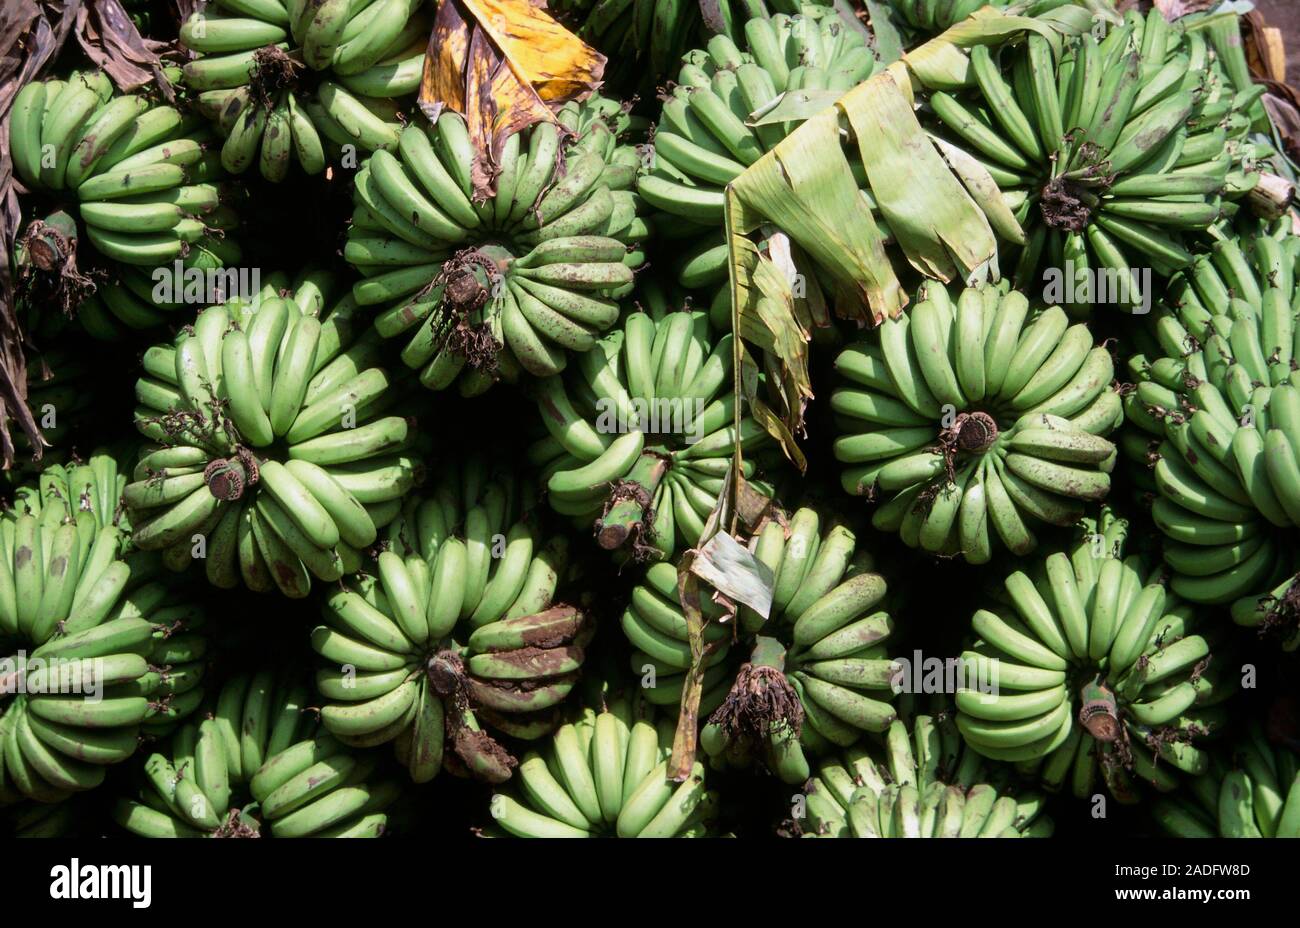 Bananas. Banana crop, Musa sp., a tropical fruit, stacked for sale or ...